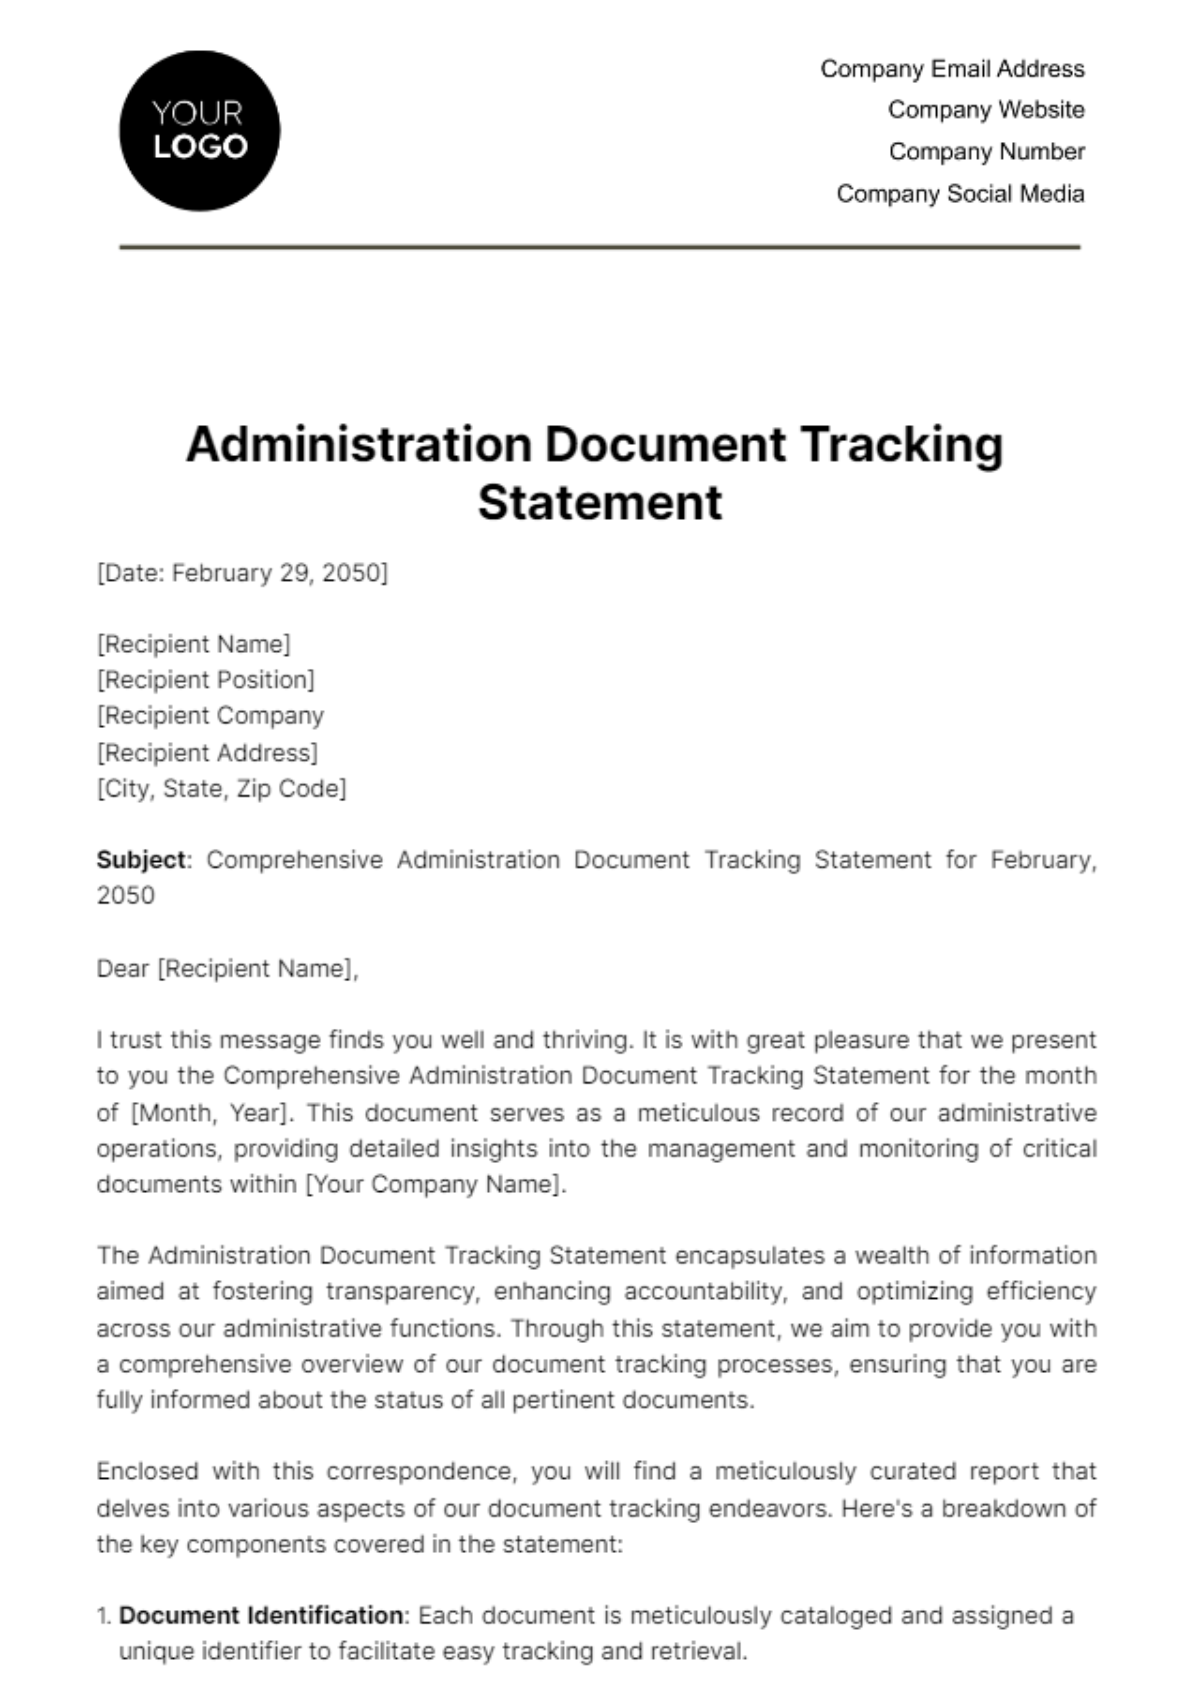 Administration Document Tracking Statement Template